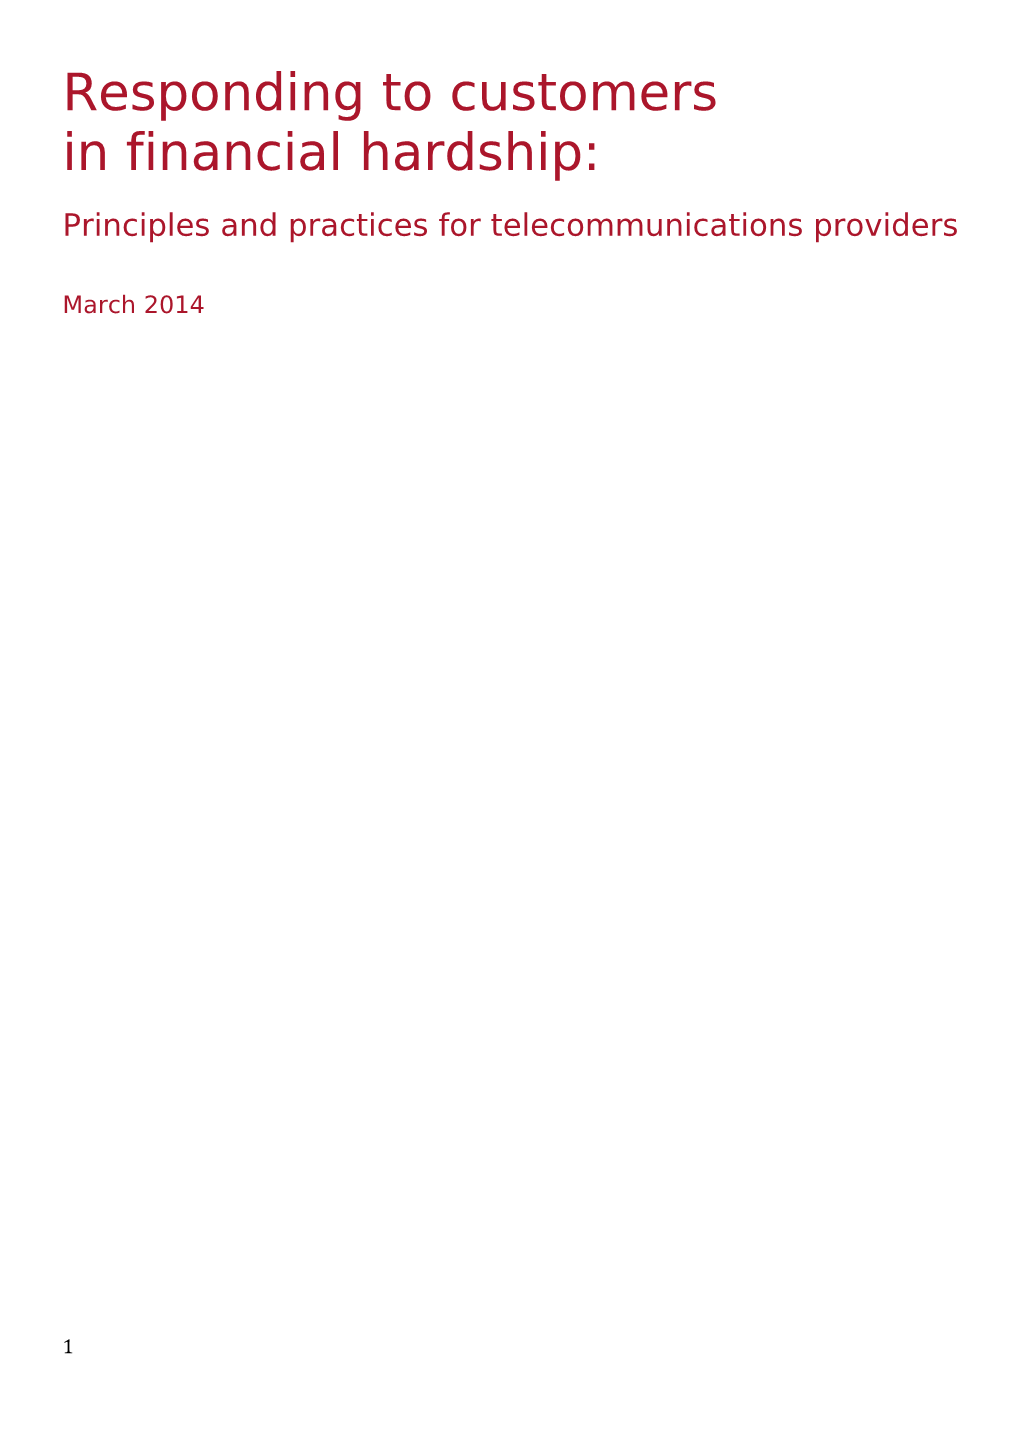 Principles and Practices for Telecommunications Providers